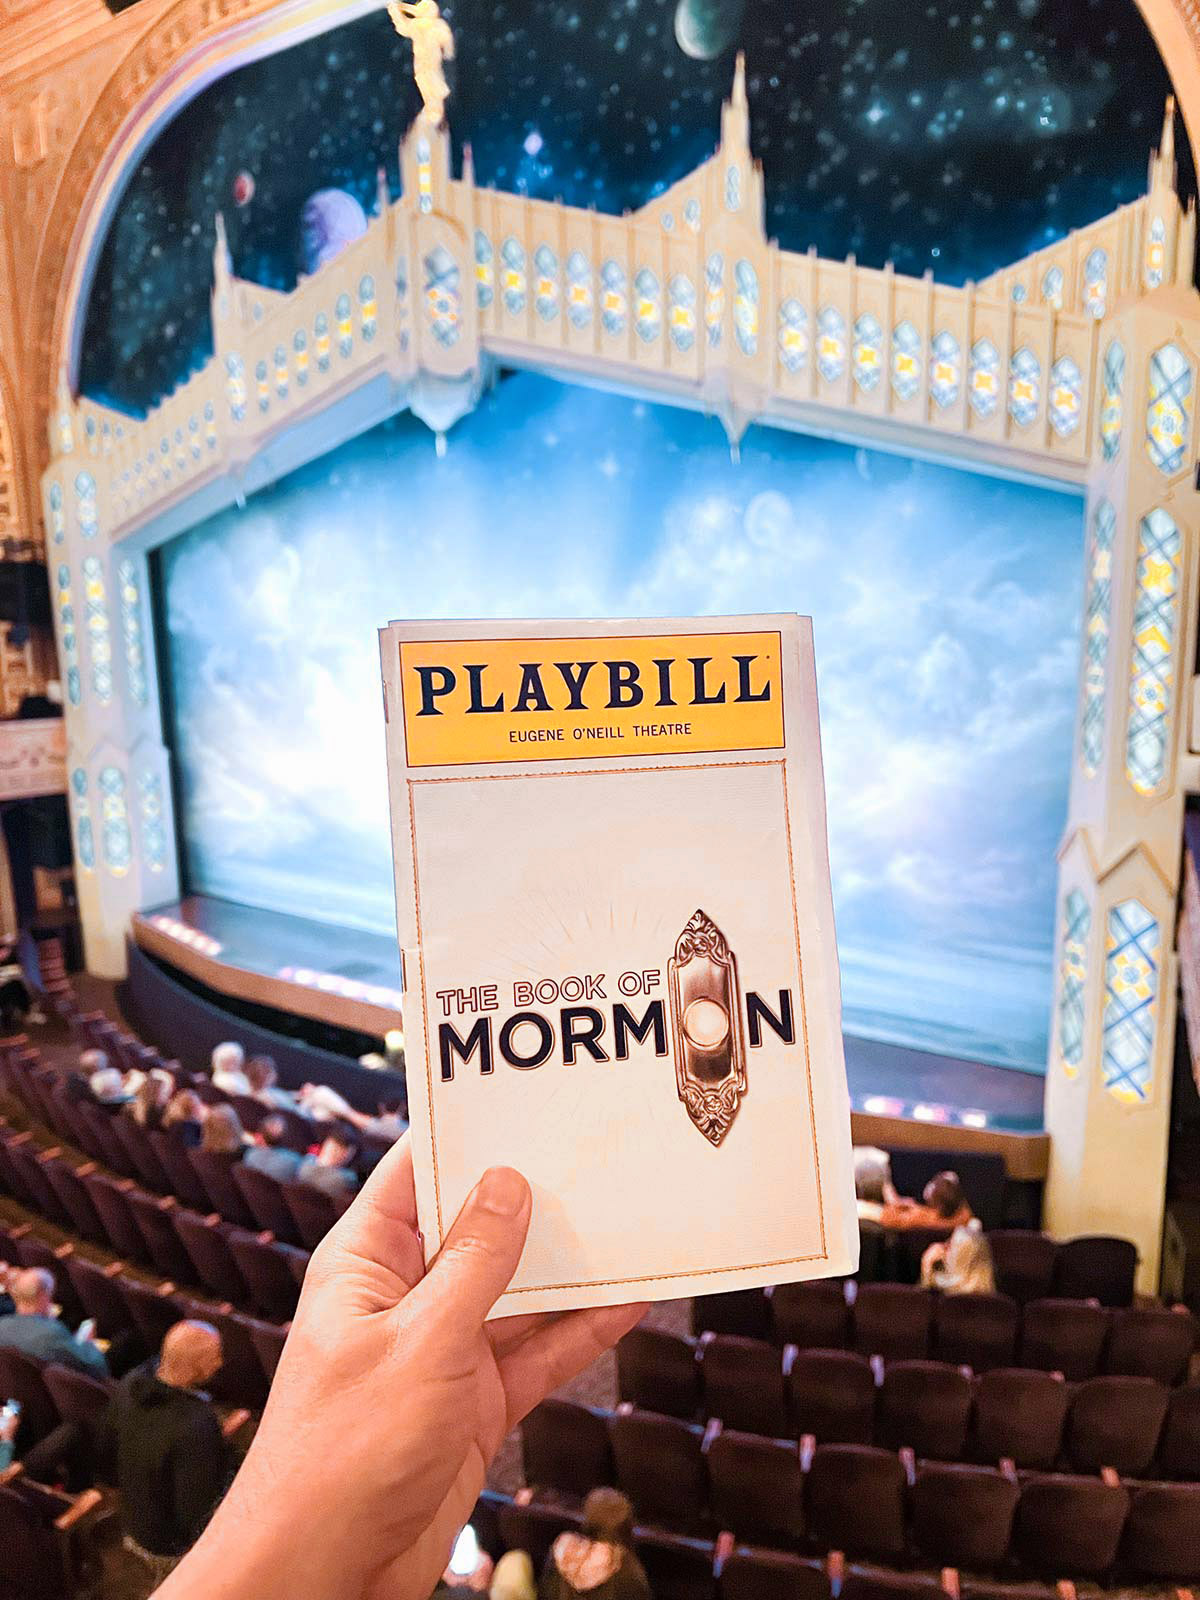 Le livre des Mormons, Broadway, New York, NY, États-Unis / The Book of Mormon, Broadway Theater, New York, NYC, USA